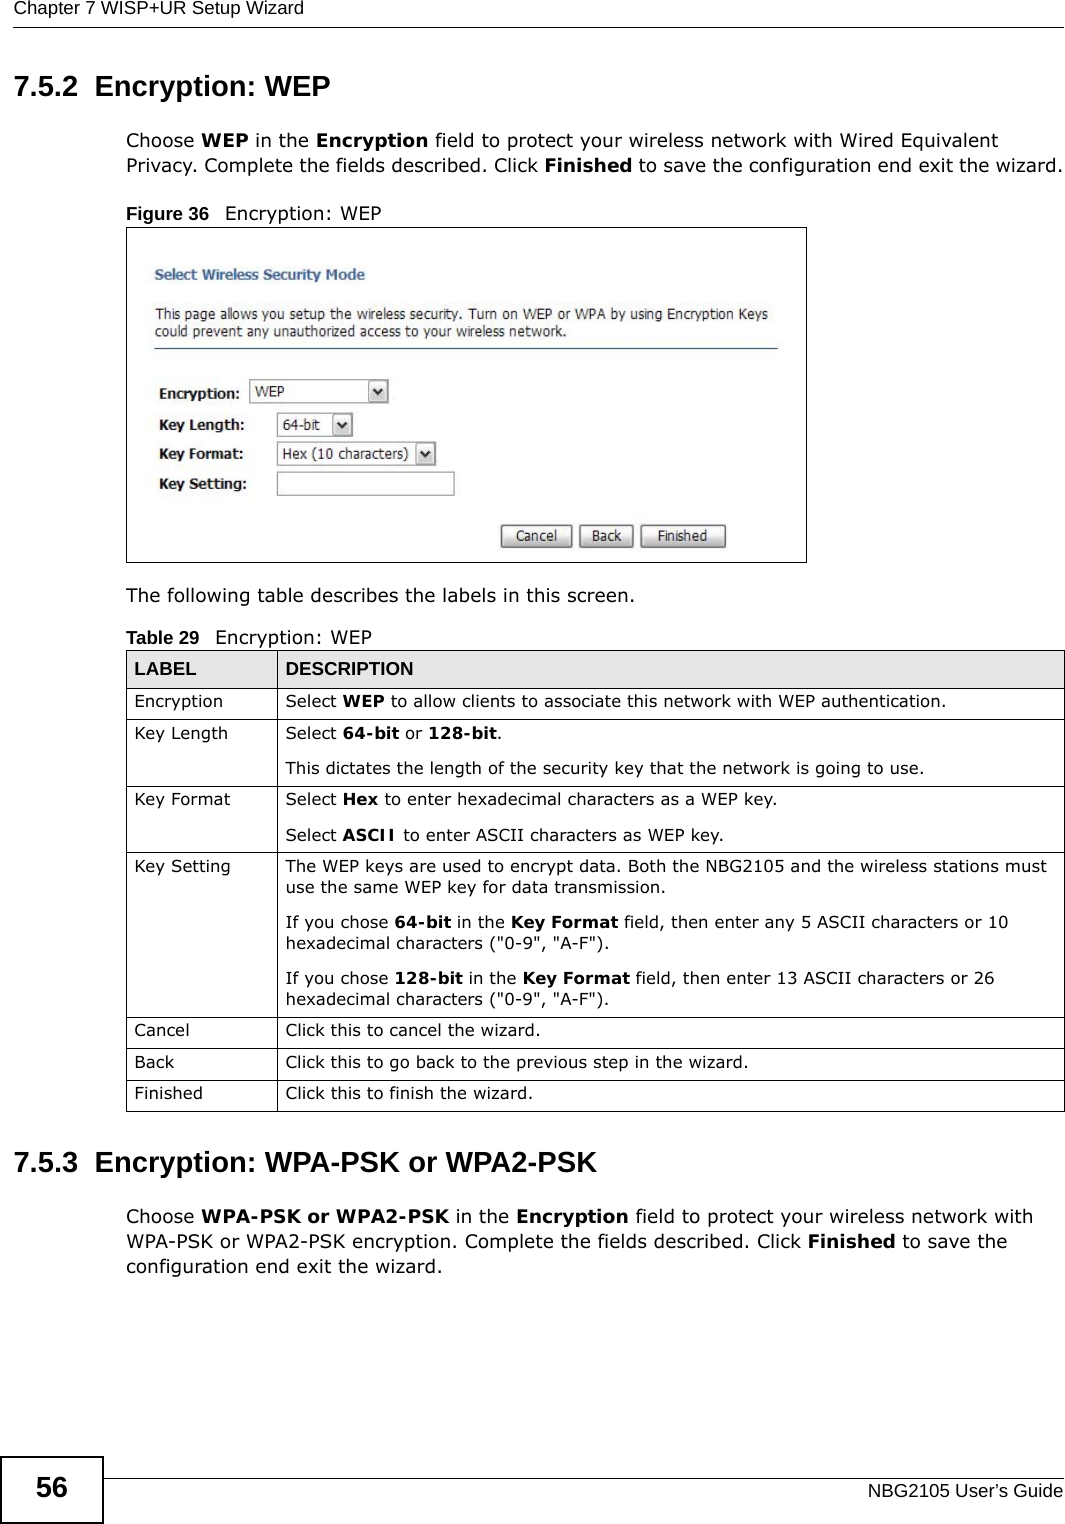 Chapter 7 WISP+UR Setup WizardNBG2105 User’s Guide567.5.2  Encryption: WEPChoose WEP in the Encryption field to protect your wireless network with Wired Equivalent Privacy. Complete the fields described. Click Finished to save the configuration end exit the wizard.Figure 36   Encryption: WEP The following table describes the labels in this screen. 7.5.3  Encryption: WPA-PSK or WPA2-PSKChoose WPA-PSK or WPA2-PSK in the Encryption field to protect your wireless network with WPA-PSK or WPA2-PSK encryption. Complete the fields described. Click Finished to save the configuration end exit the wizard.Table 29   Encryption: WEPLABEL DESCRIPTIONEncryption Select WEP to allow clients to associate this network with WEP authentication.Key Length Select 64-bit or 128-bit.This dictates the length of the security key that the network is going to use.Key Format Select Hex to enter hexadecimal characters as a WEP key. Select ASCII to enter ASCII characters as WEP key. Key Setting The WEP keys are used to encrypt data. Both the NBG2105 and the wireless stations must use the same WEP key for data transmission.If you chose 64-bit in the Key Format field, then enter any 5 ASCII characters or 10 hexadecimal characters (&quot;0-9&quot;, &quot;A-F&quot;).If you chose 128-bit in the Key Format field, then enter 13 ASCII characters or 26 hexadecimal characters (&quot;0-9&quot;, &quot;A-F&quot;). Cancel Click this to cancel the wizard.Back Click this to go back to the previous step in the wizard.Finished Click this to finish the wizard.